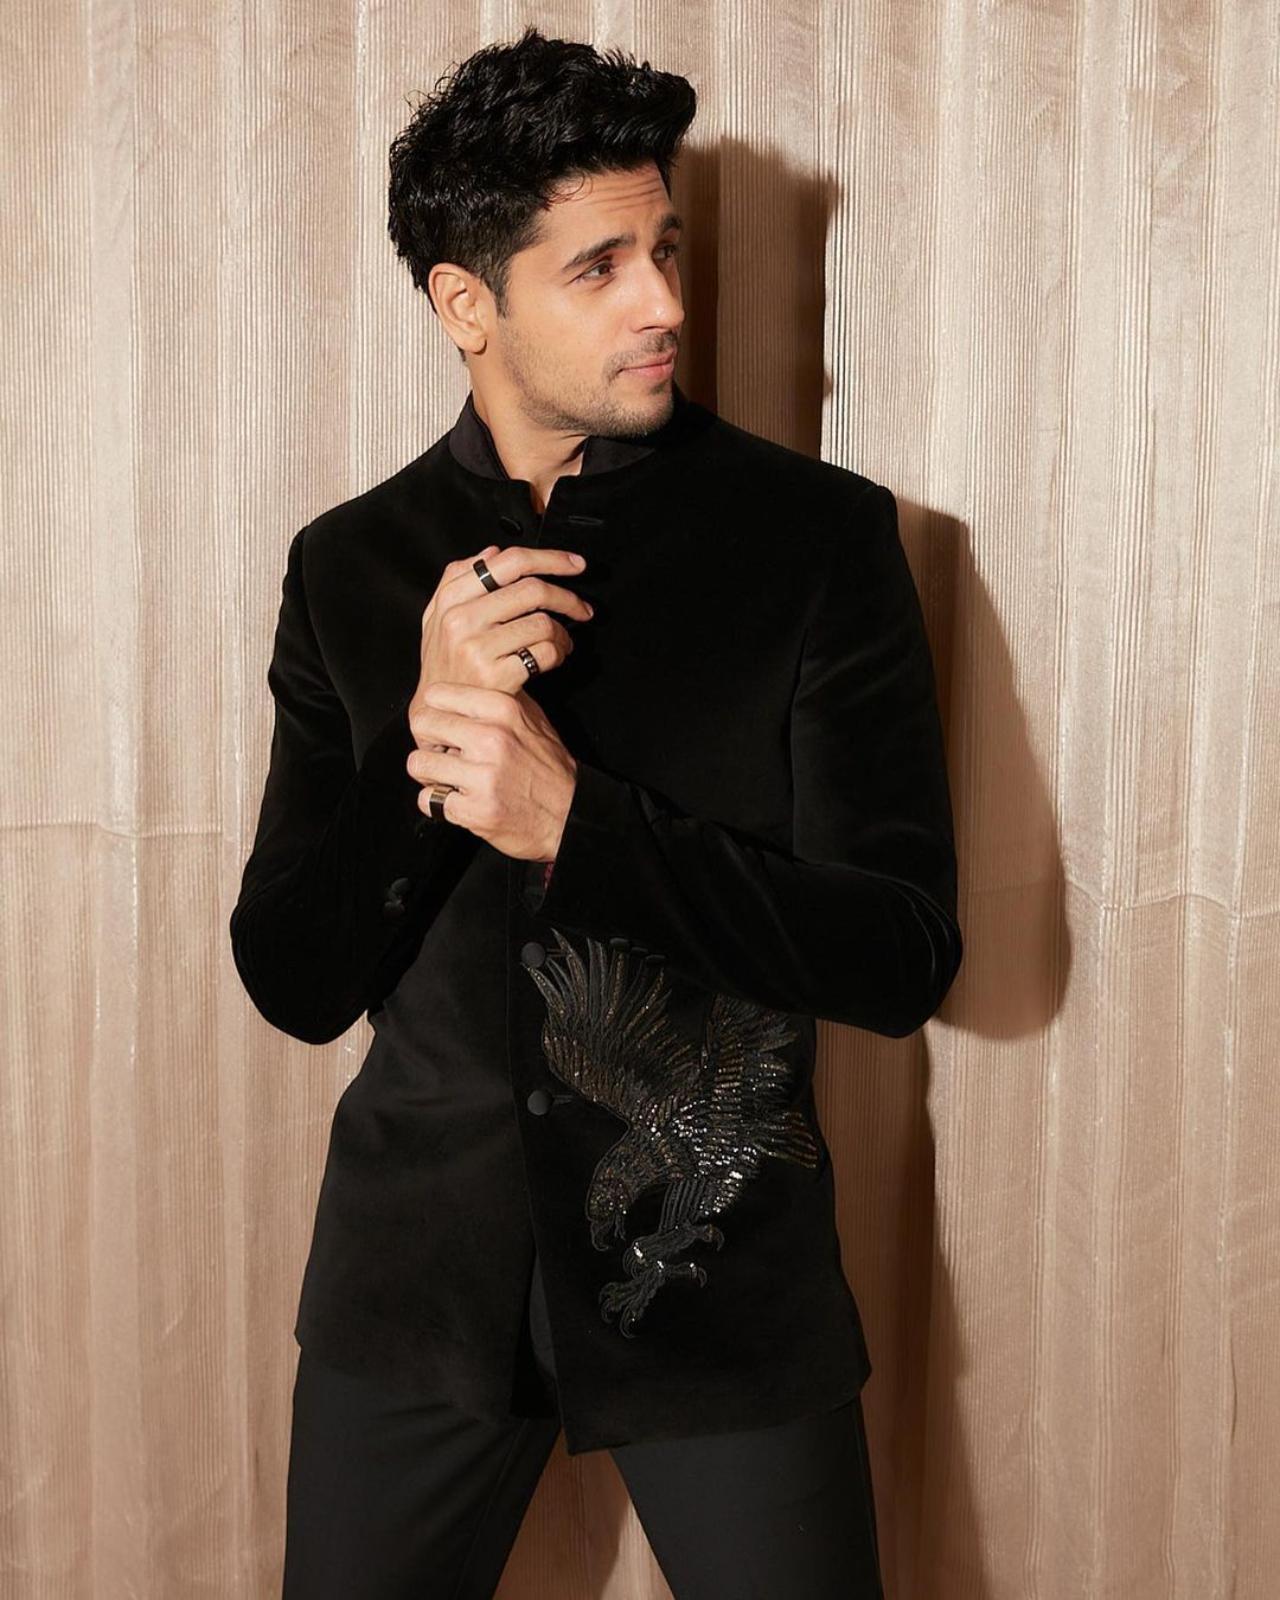 Hi Handsome!
It's a proven fact that Sidharth loves to play with black shades when it comes to fashion and especially, ethics. The Punjabi munda of B-town made headlines when he posted a string of pictures donning a beguiling black bandhgala suit. The velvet jacket which had a finely embroidered and embellished eagle patch was the key highlight of Sid's ethnic suit. Giving royal vibes, the actor slayed as he paired up his designer bandhgala jacket with straight-fit black formal pants. The 'Mission Majnu' star glamourised his ethnic look by wearing shimmery silver loafers. The heartthrob rounded off the luxe ethnic look by sporting black rings in both hands. After coming across this ethnic avatar of Sidharth, we are pretty sure that you have fallen head over heels for our handsome groom-to-be!